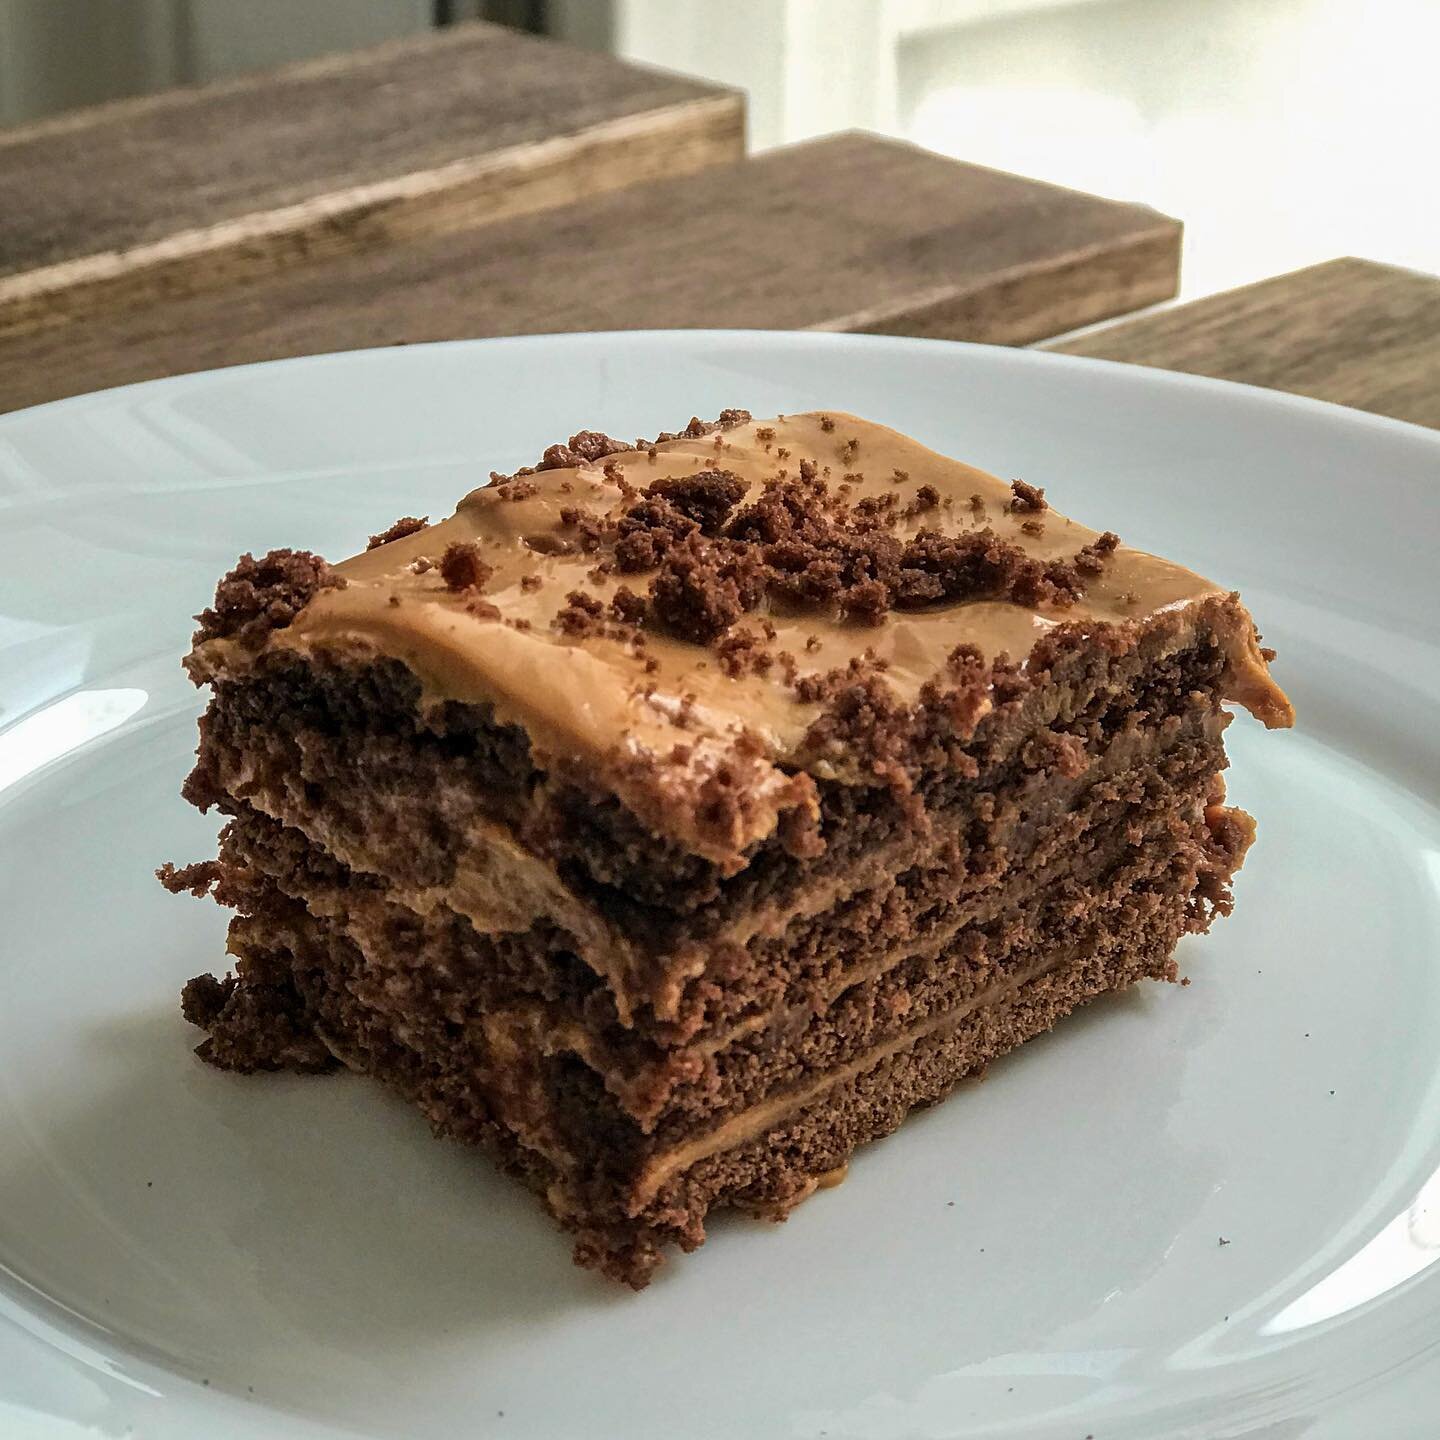 🇦🇷 #stayhome and visit Argentina through this chocotorta from @xjosefinamateo: &ldquo;The translation of this dessert is literally &lsquo;choco-cake&rsquo;. For the last decades, it&rsquo;s been the typical birthday cake, and its story is one of th